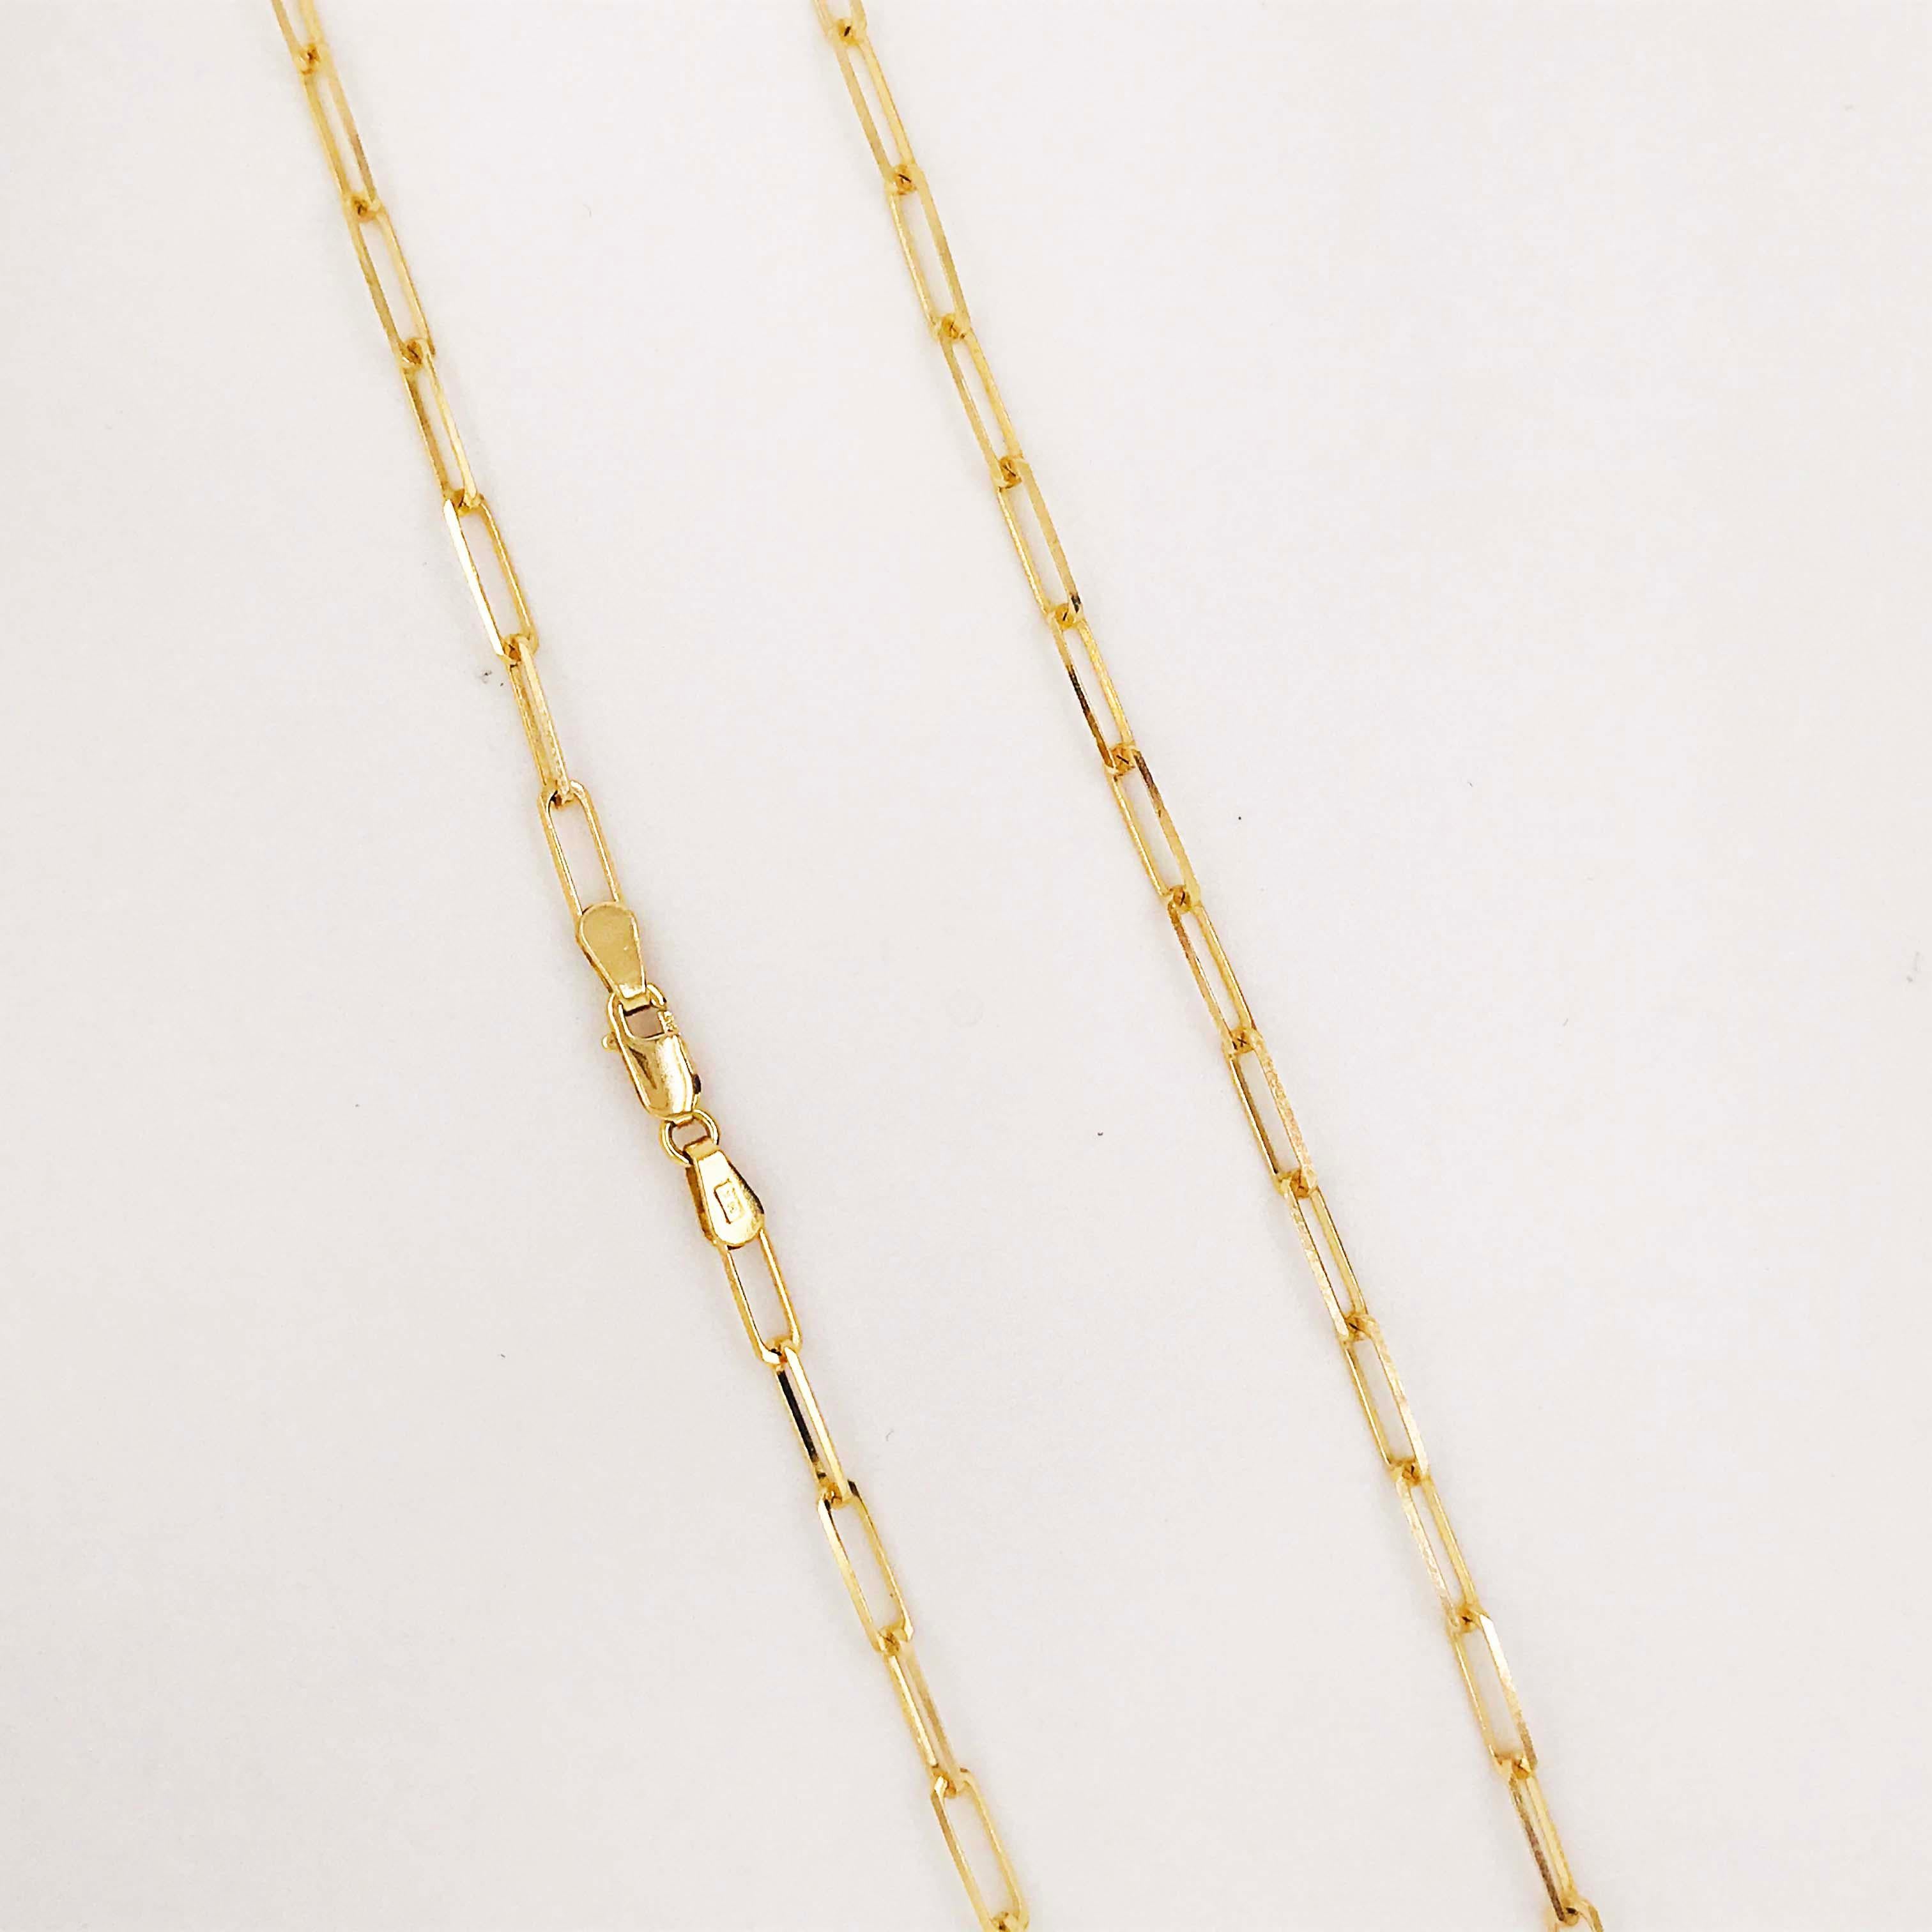 Paperclip Link Chain Necklace in 14 Karat Yellow Gold, 14 Karat Paperclip 4